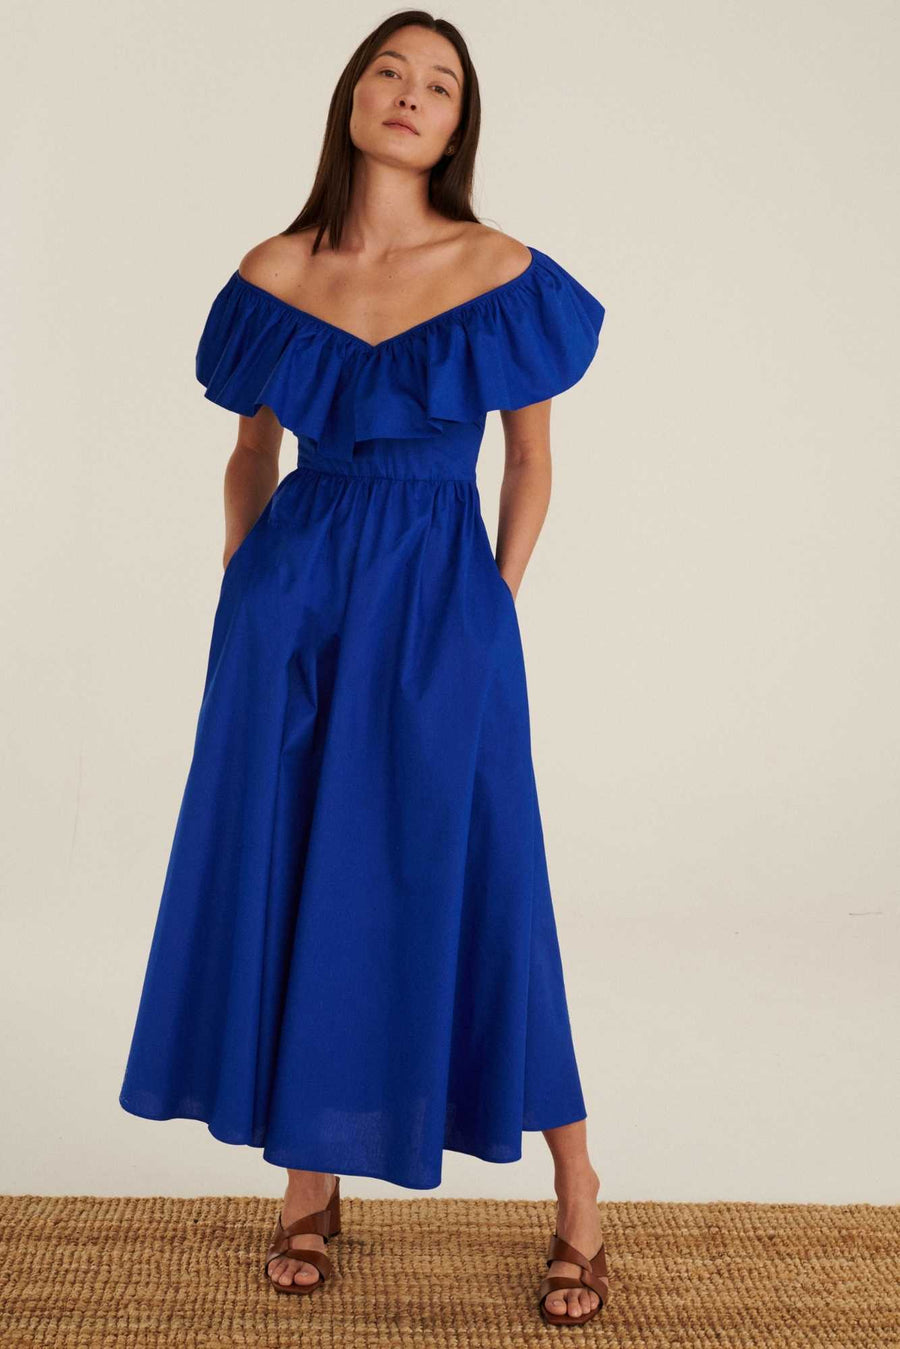 Les Goodies - She Is Sunday Rome Blue Dress